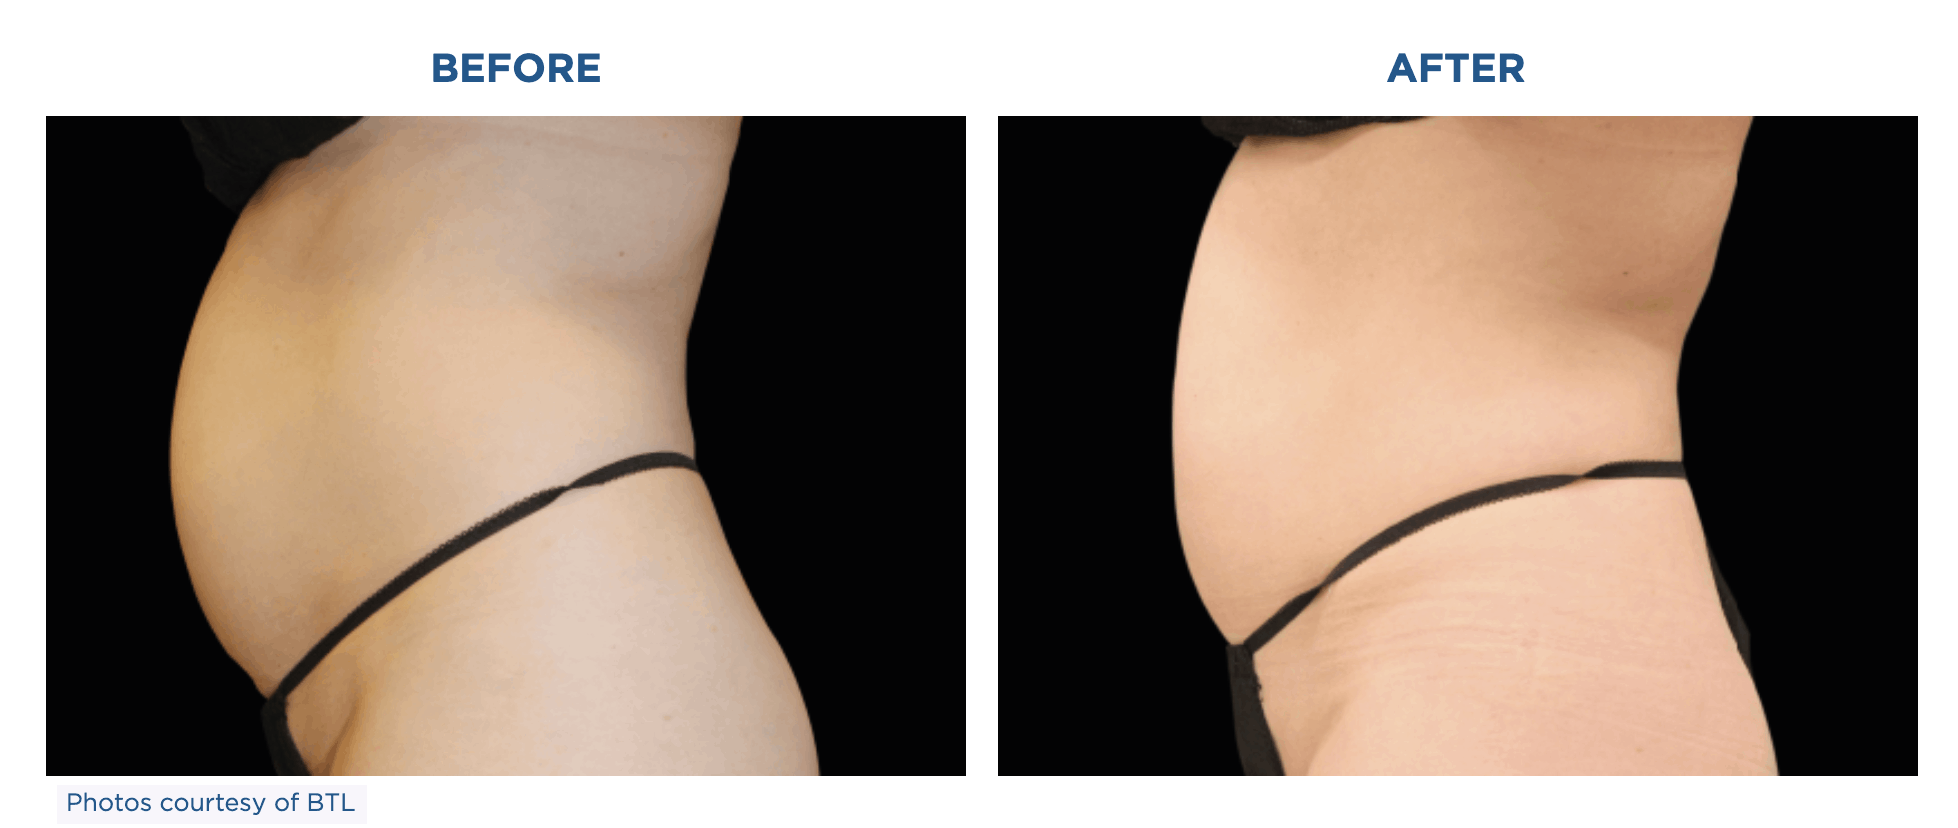 Emsculpt Neo for tummy tuck before and after results.